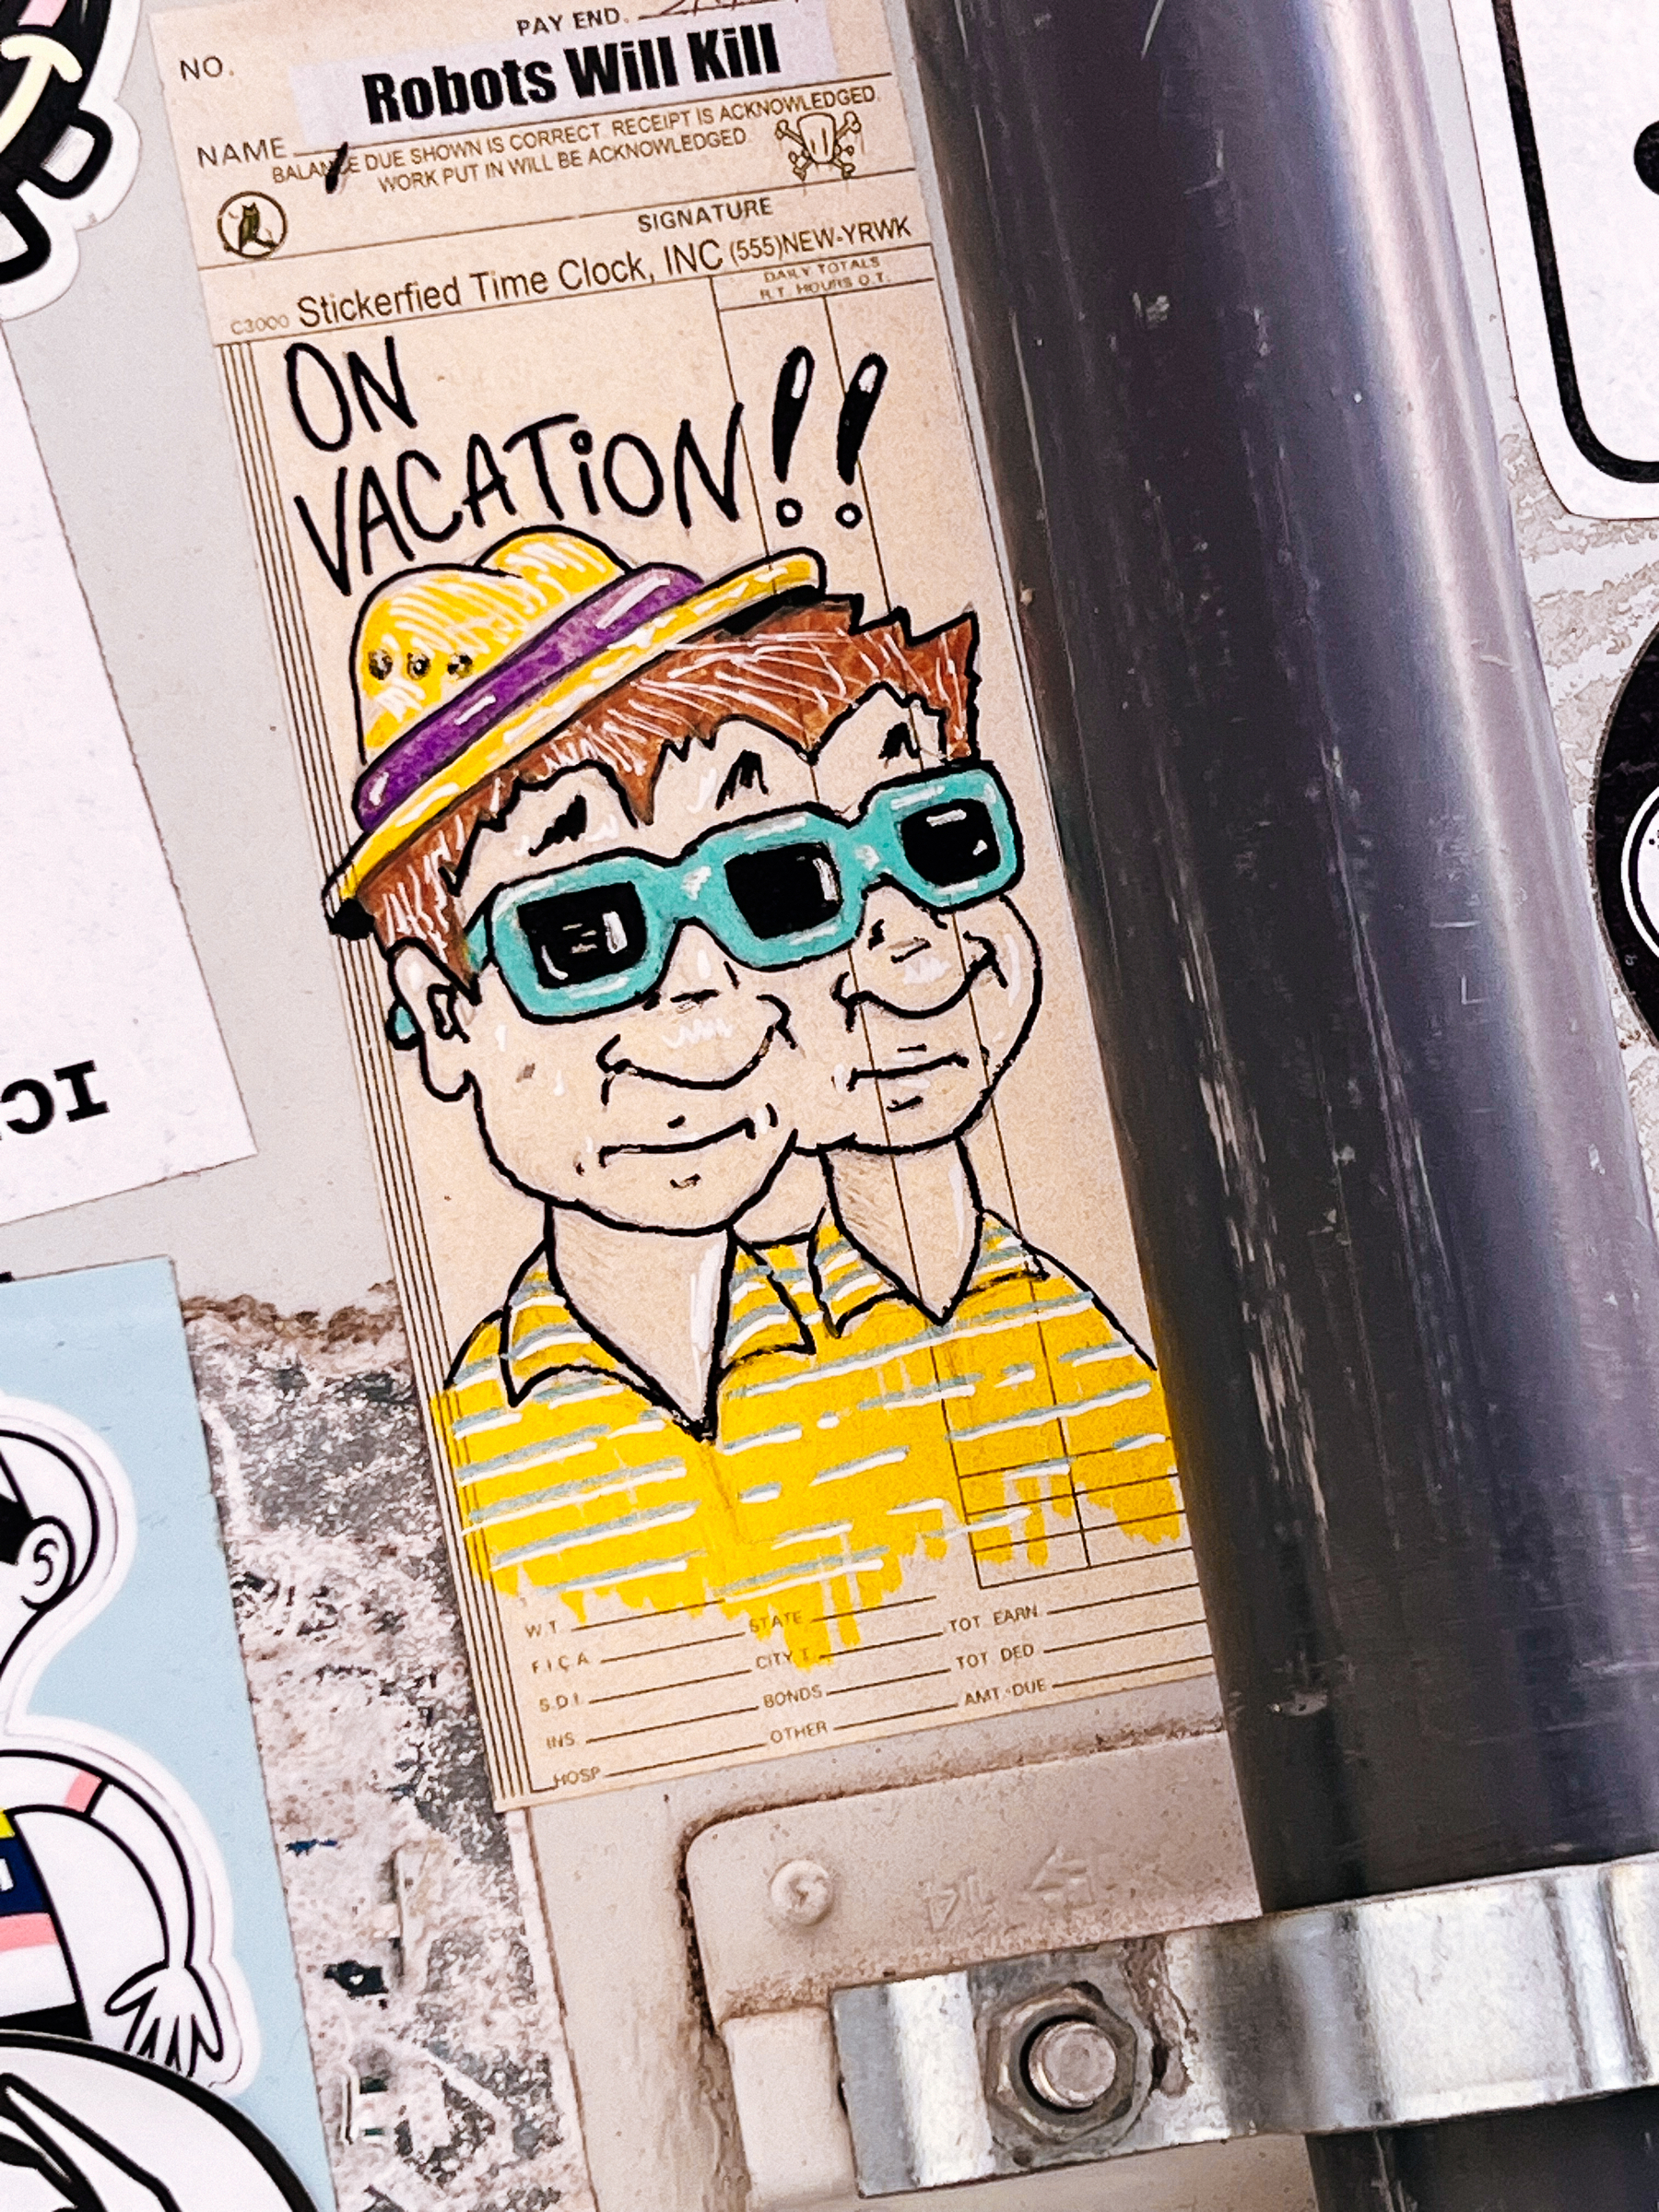 Siamese twins, wearing one hat and a three-eyes pair of glasses, with “On Vacation!!” written above them. 